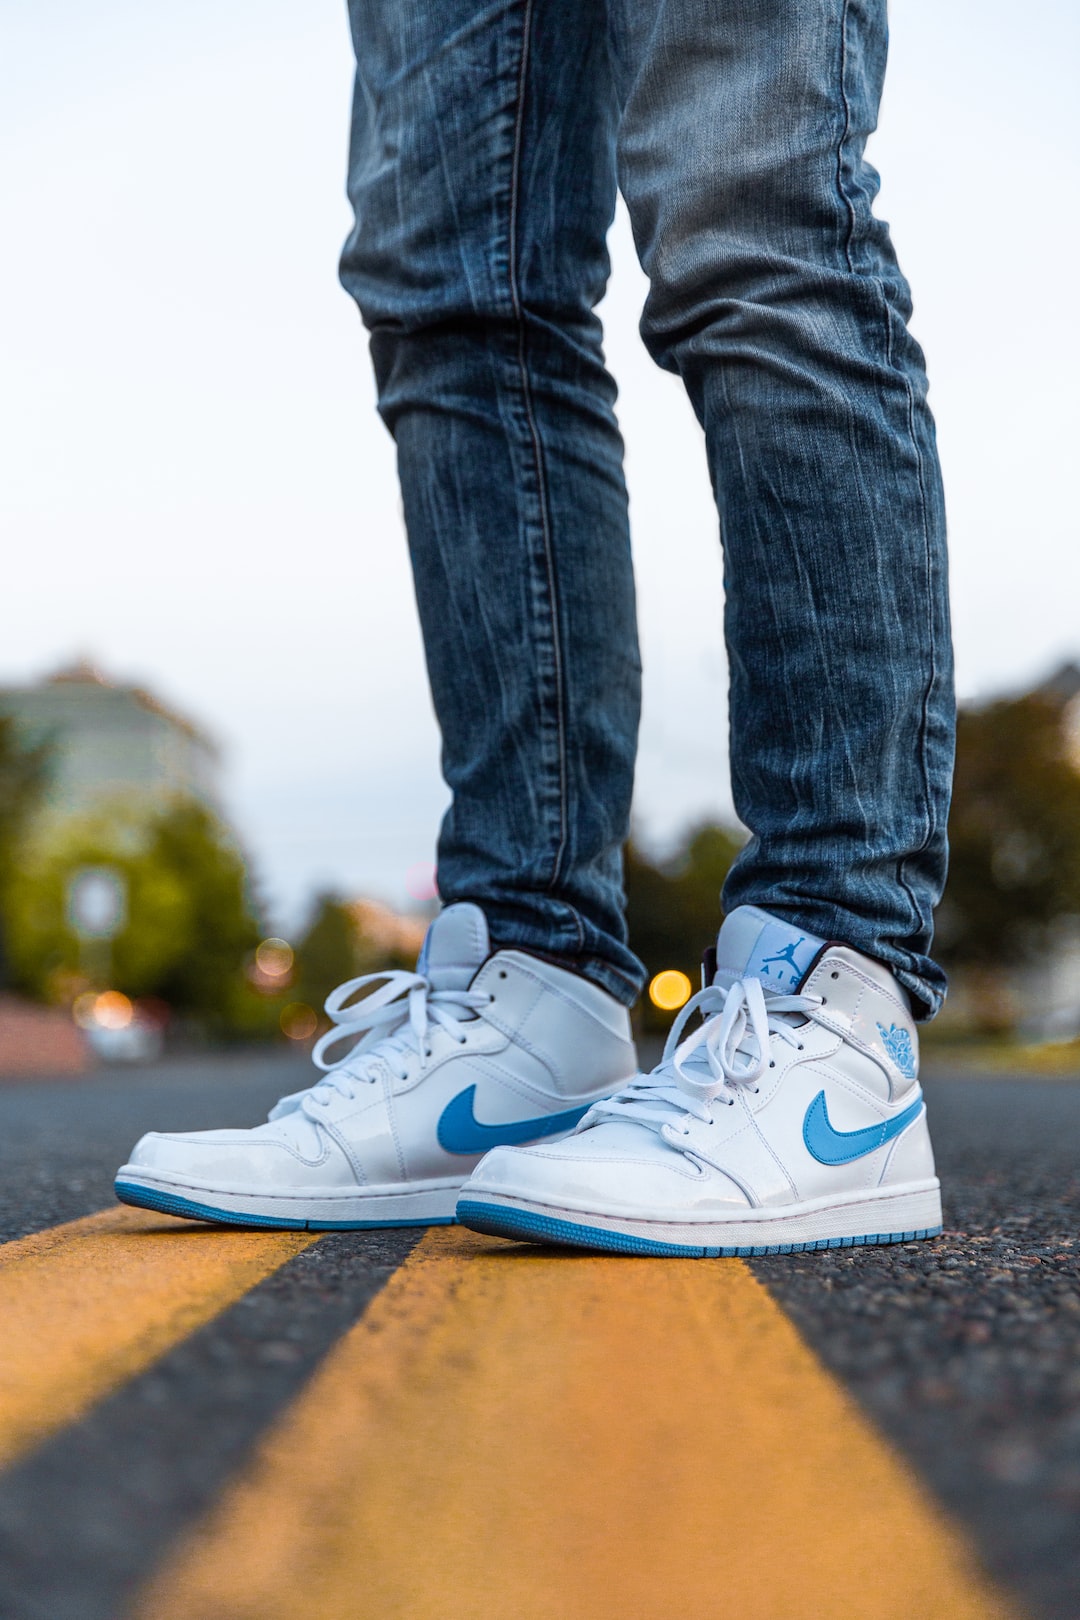 selective focus photography of person wearing blue-and-white Nike Air Jordan 1's